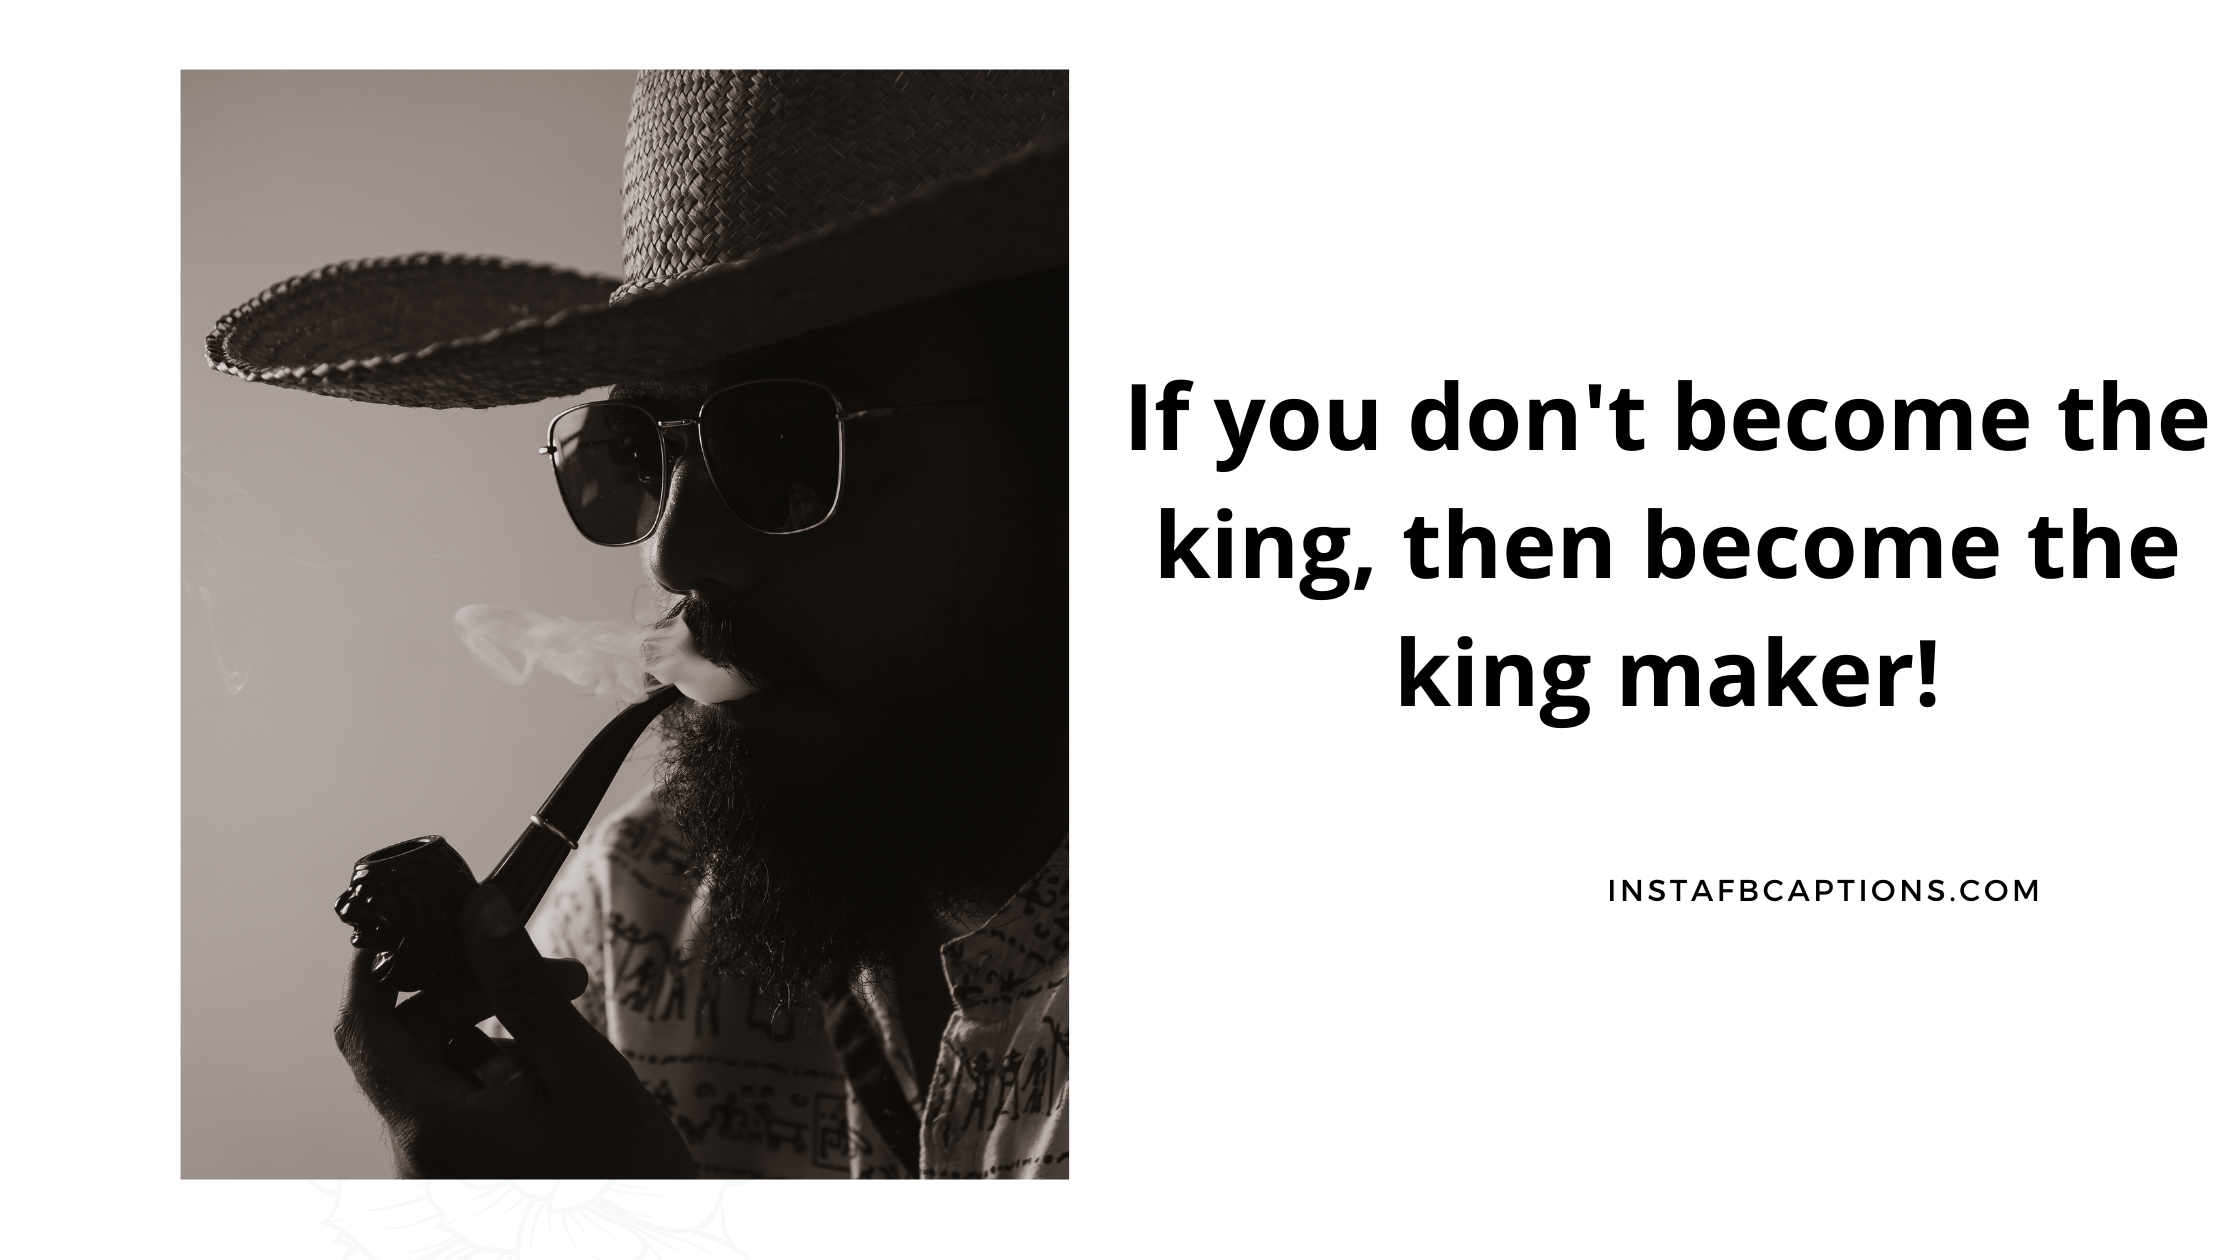 If you don't become the king, then become the kingmaker!  - Top Kingmaker Captions For Instagram Selfies - [New Captions] King Captions For Boys Instagram Post in 2023